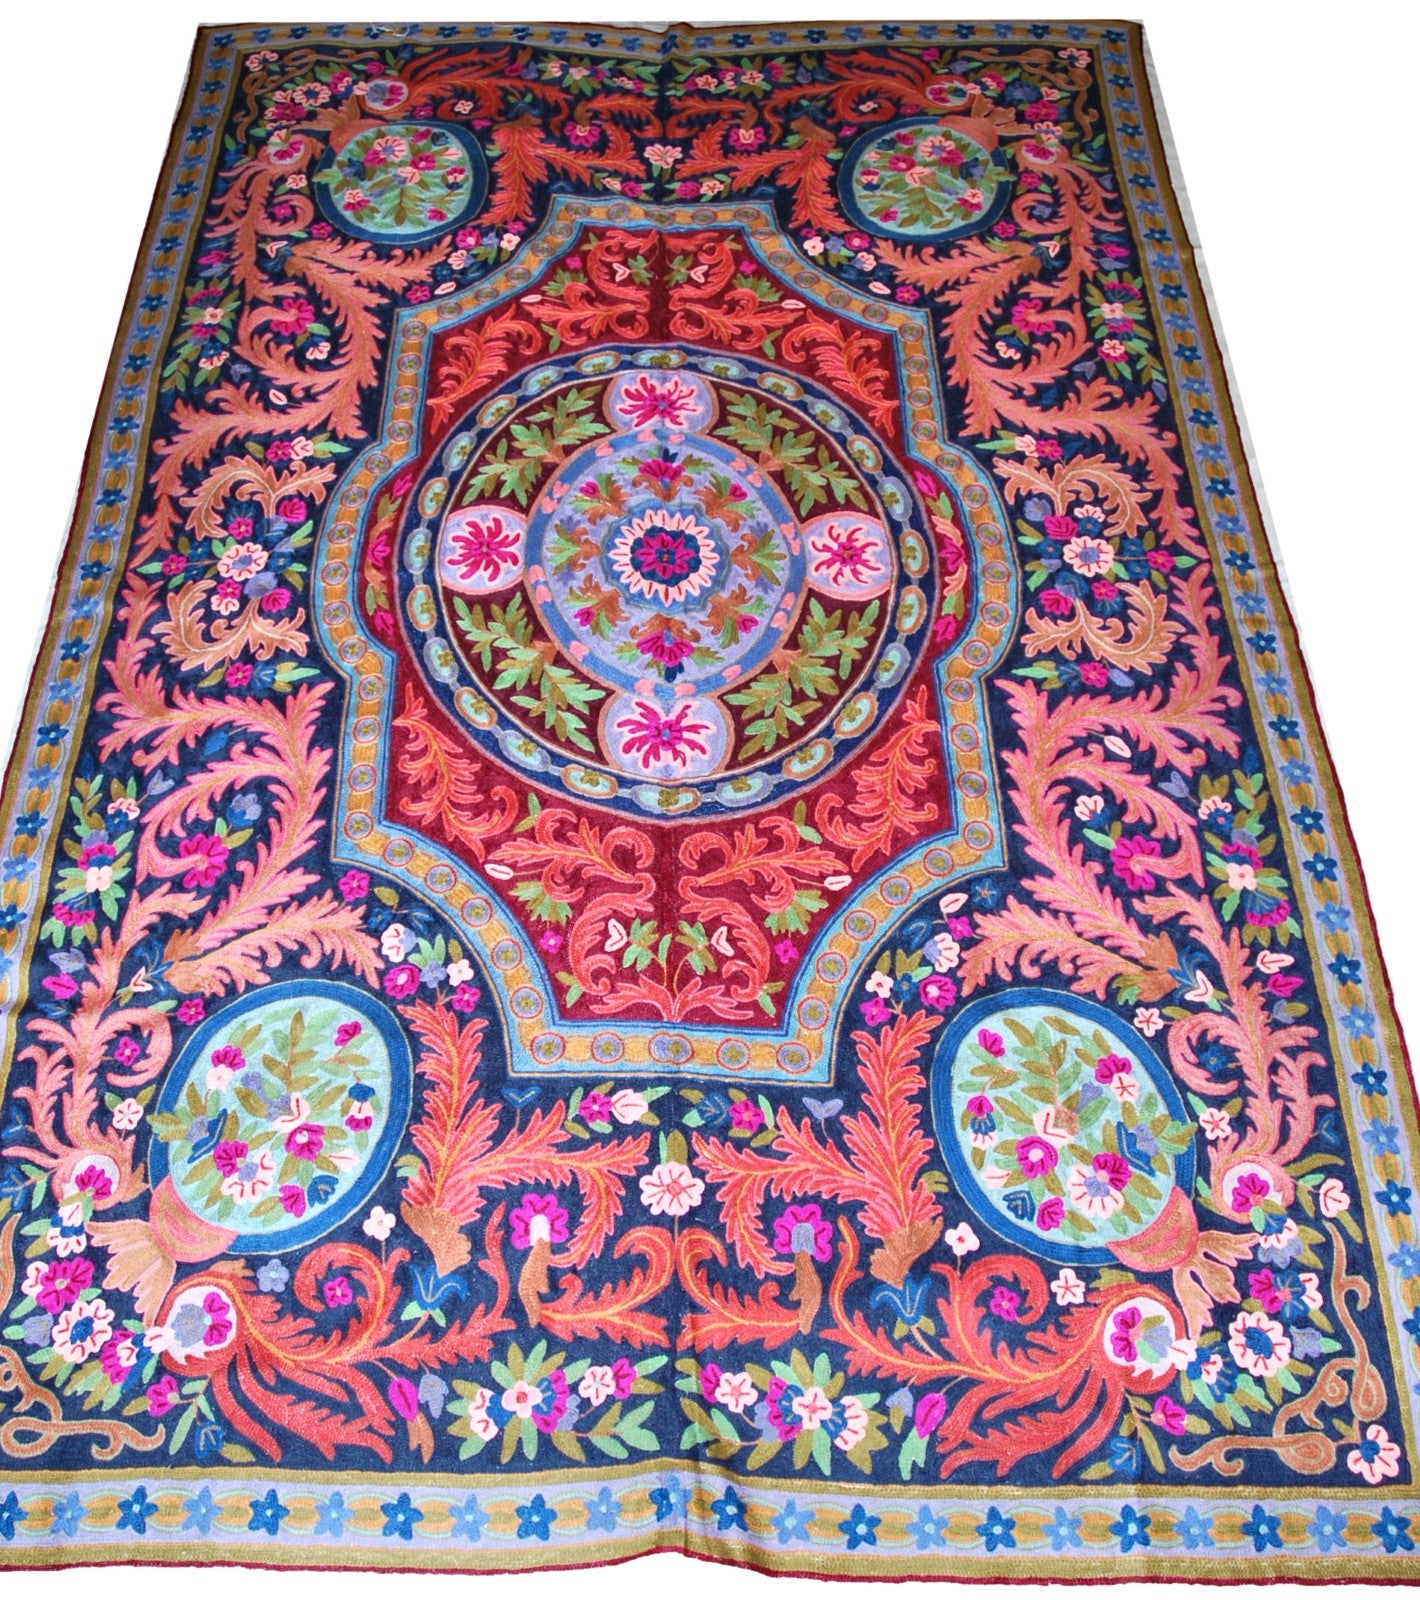 ChainStitch Tapestry Woolen Area Rug, Multicolor Embroidery 6x9 feet #CWR54107